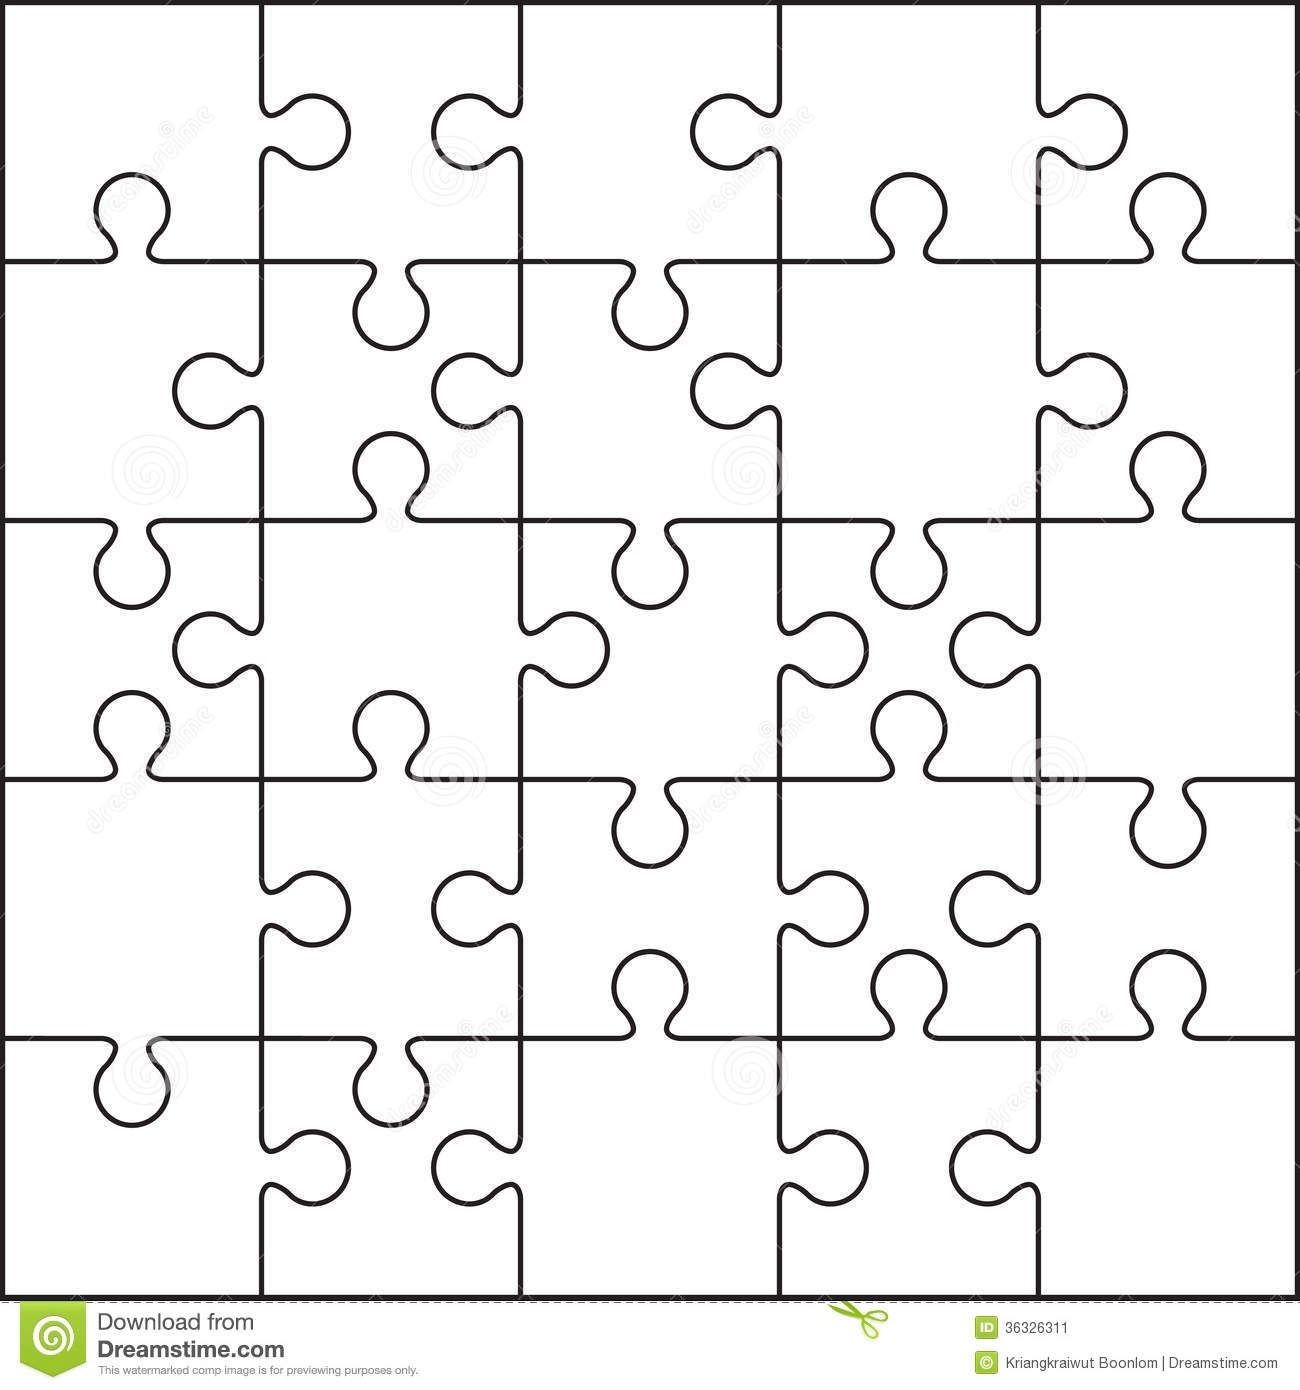 25 Jigsaw Puzzle Blank Template Stock Illustration – Illustration Of Pertaining To Blank Jigsaw Piece Template